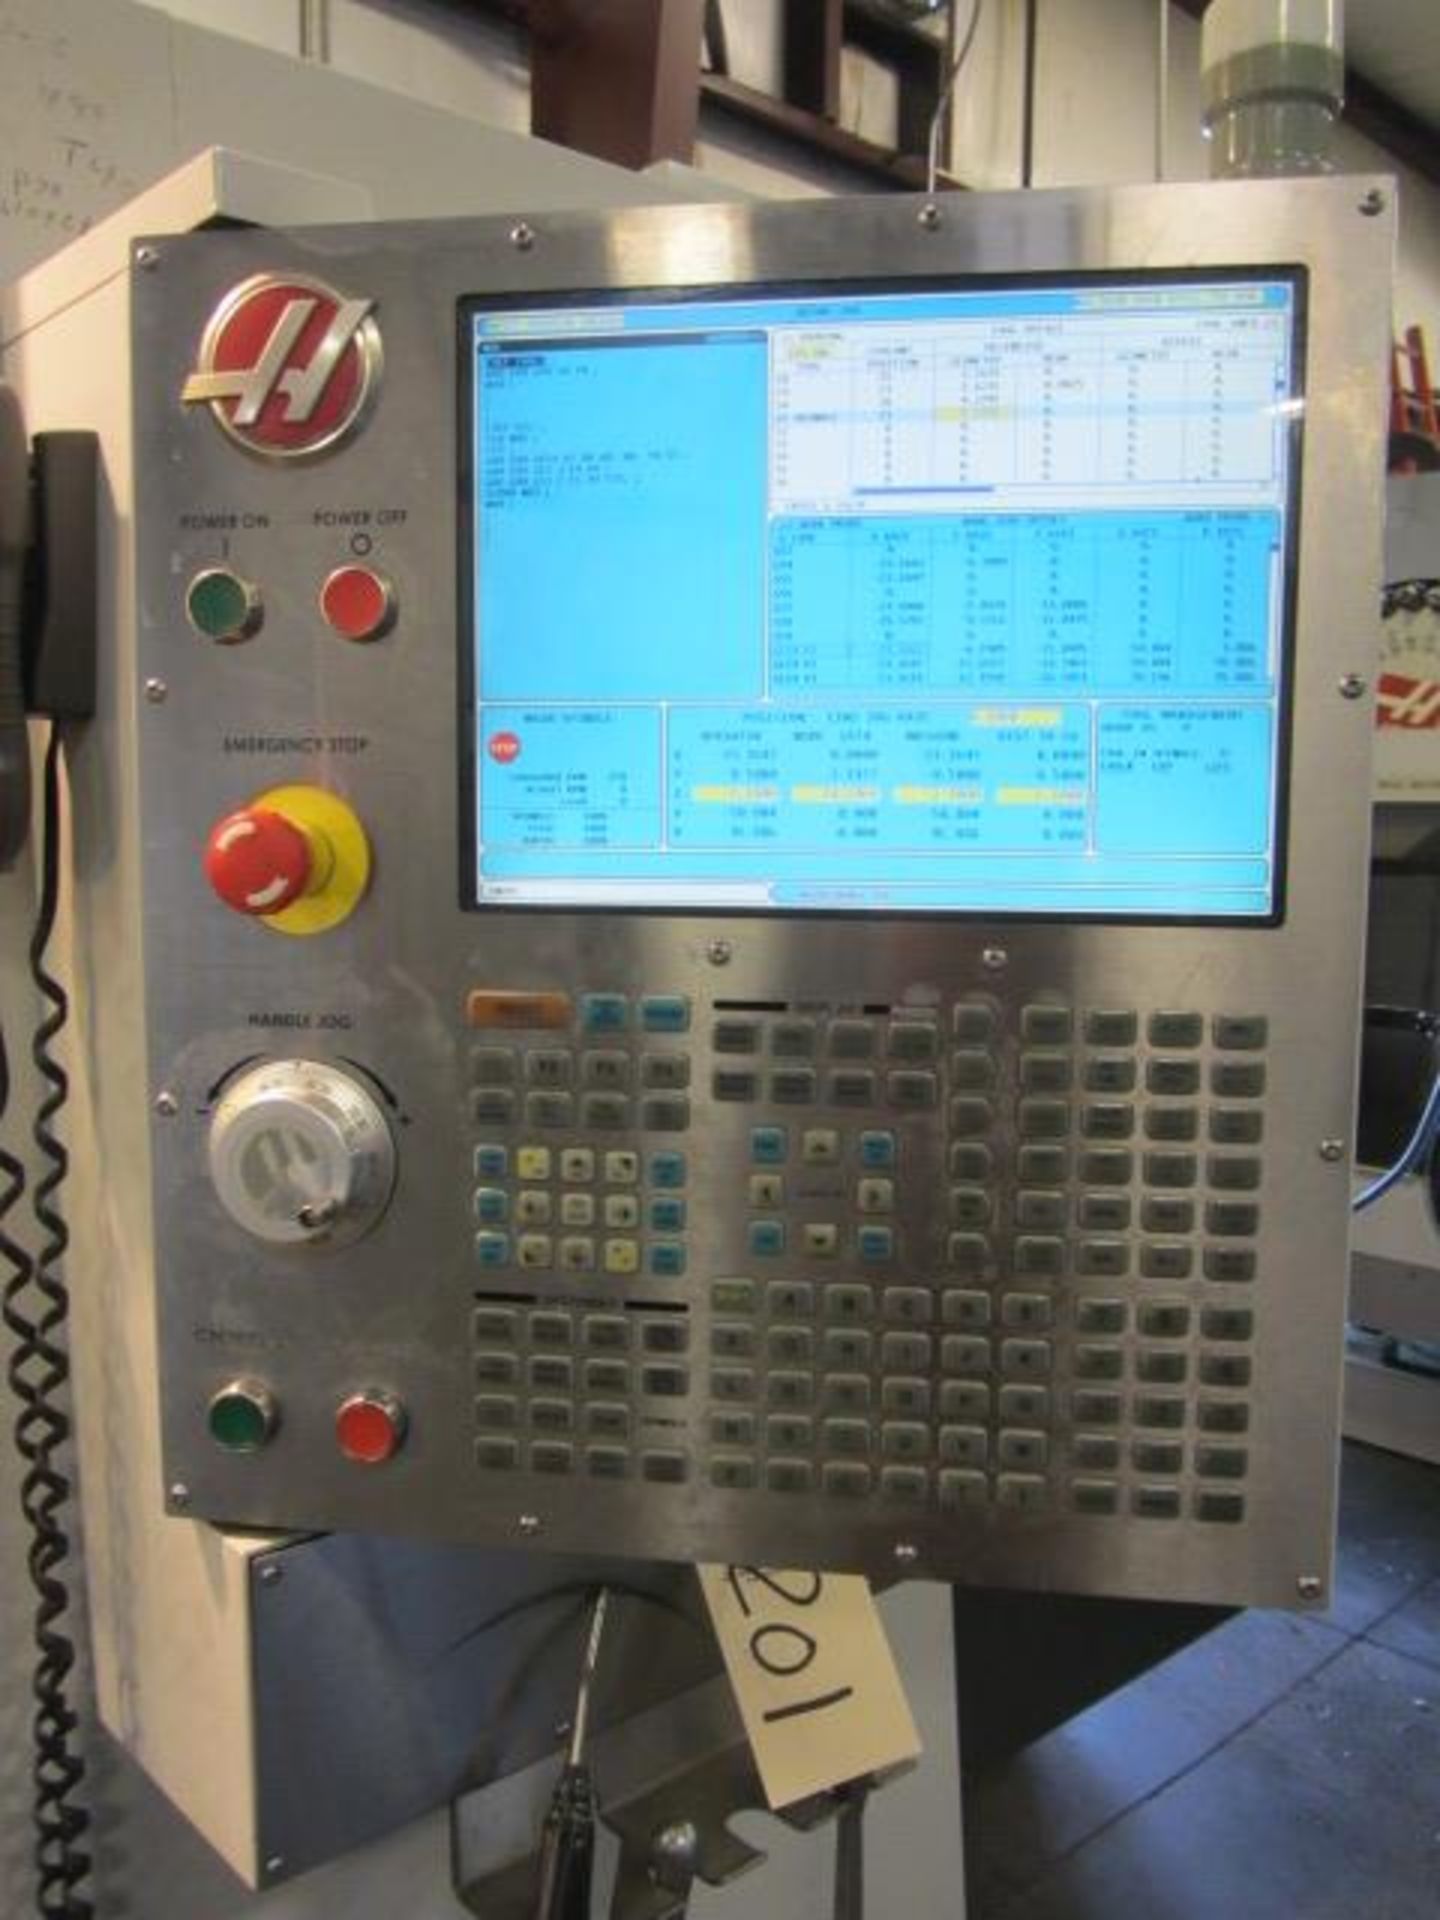 Haas VF3DAPC 5-Axis CNC Vertical Machining Center with Dual Pallet Changer, Intuitive Probing, - Image 6 of 11